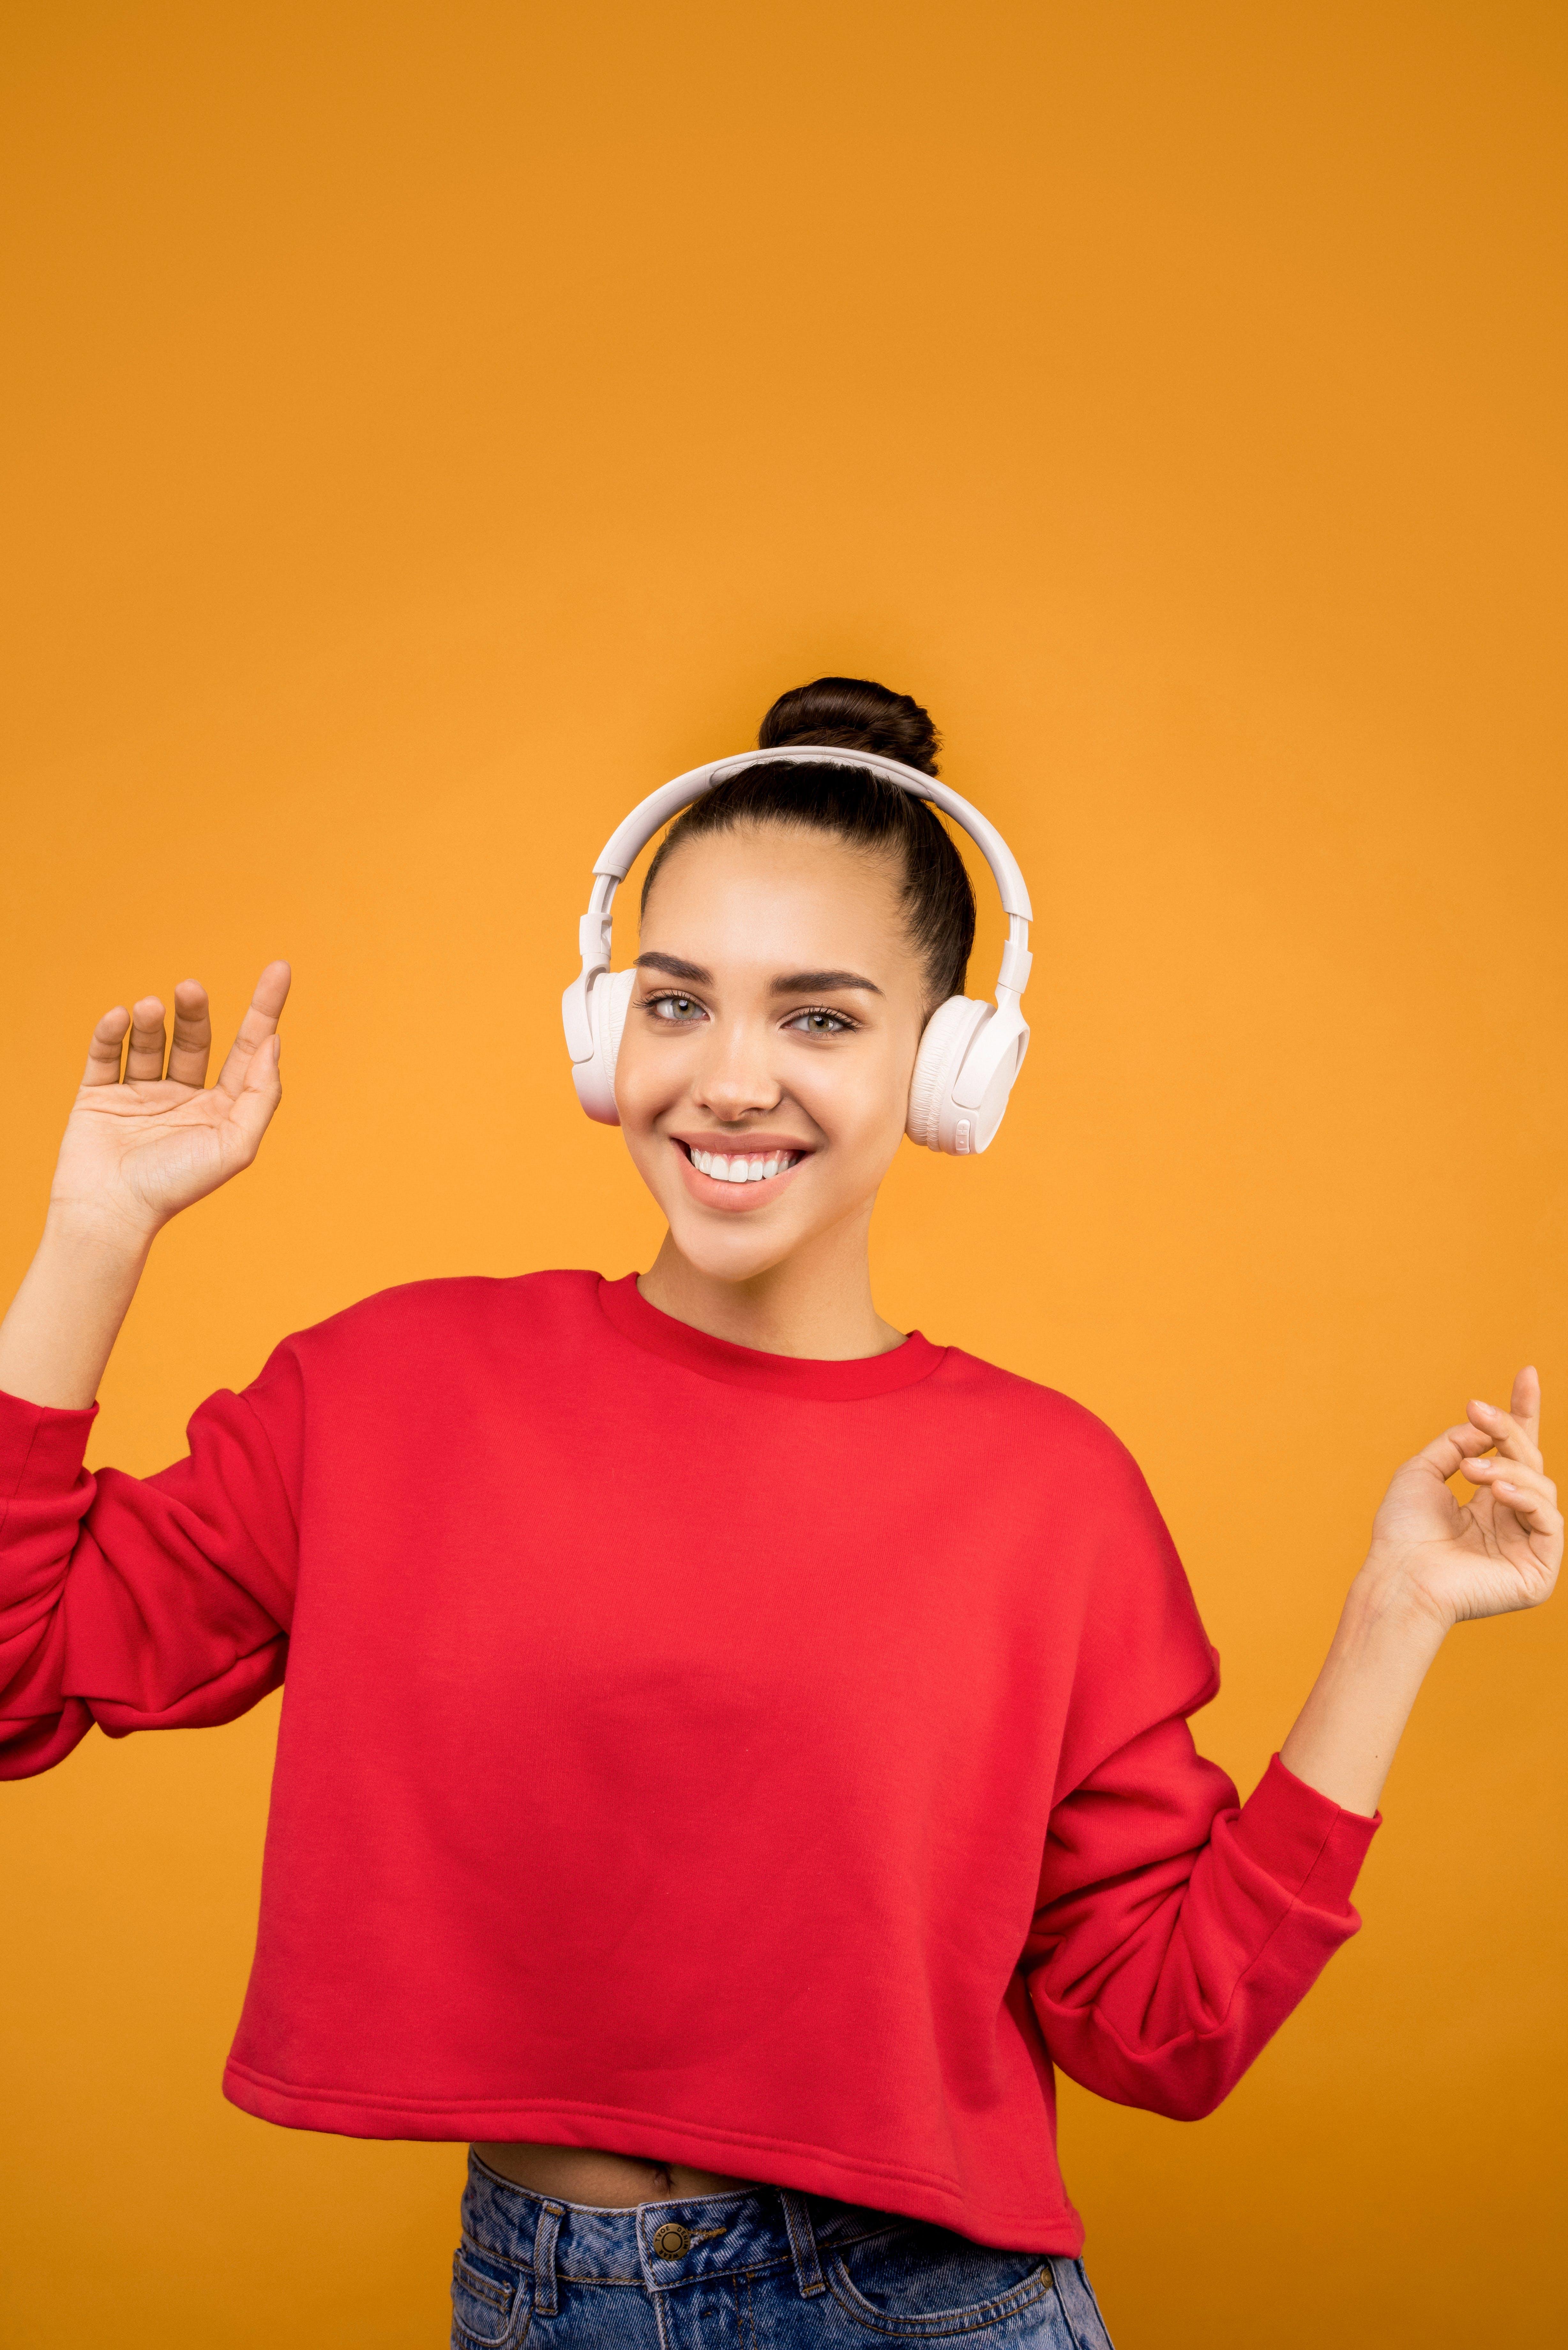 Which ear is best for listening music? 